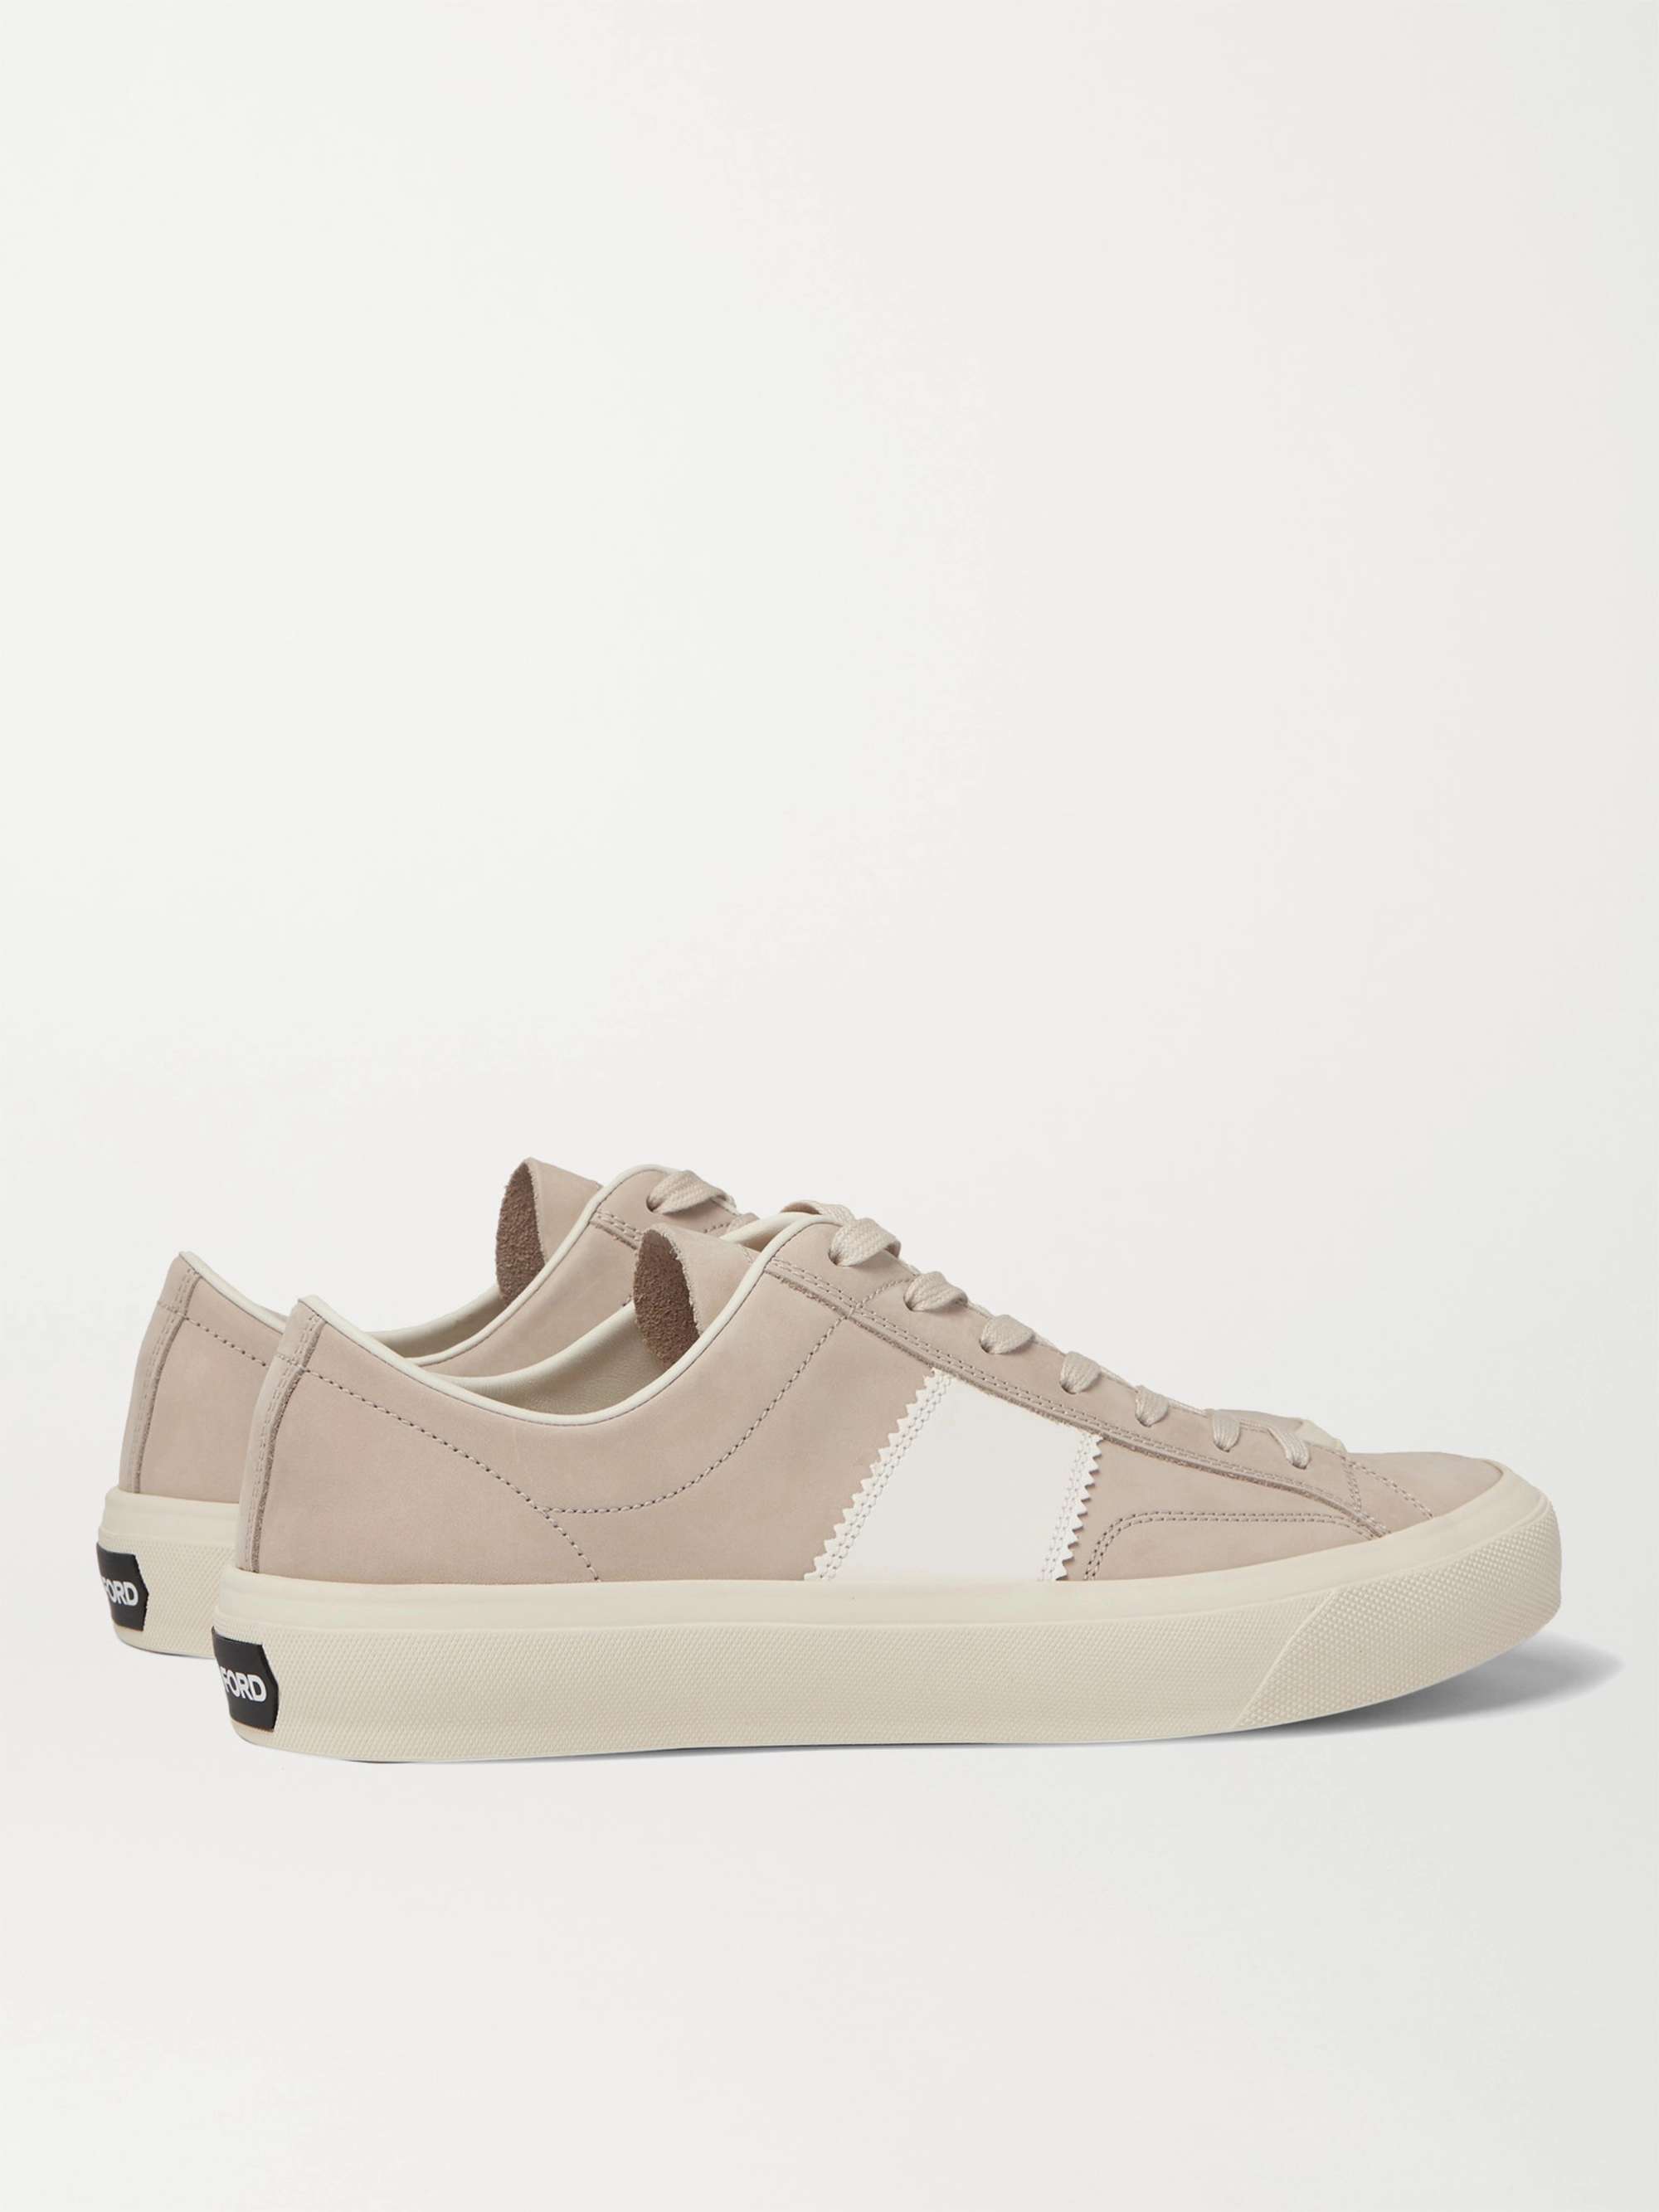 TOM FORD Cambridge Leather-Trimmed Nubuck Sneakers